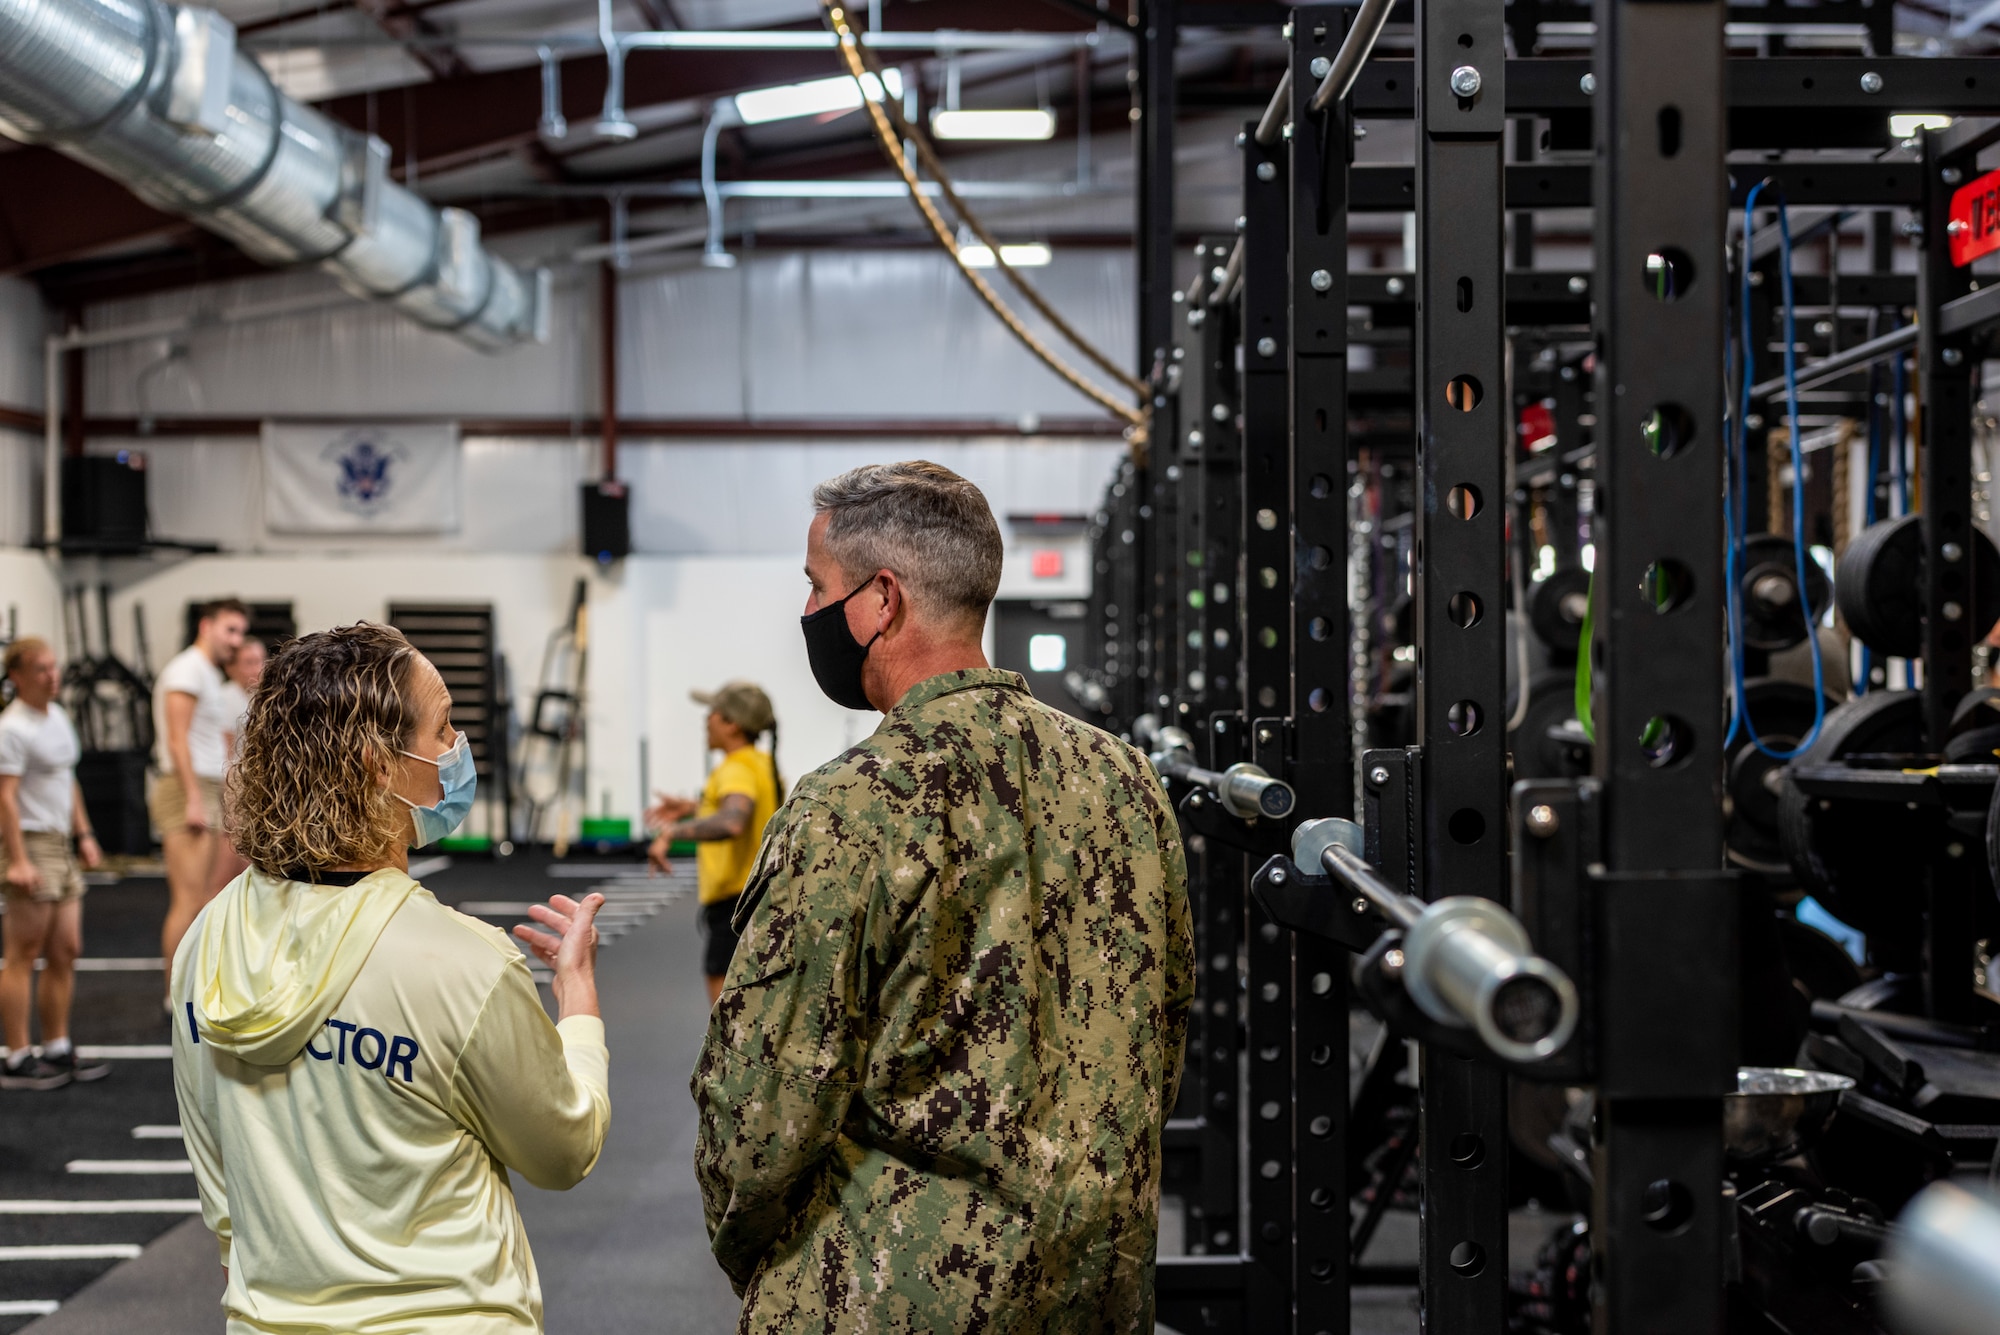 Female instructor briefs a male DV on the new fitness facility.